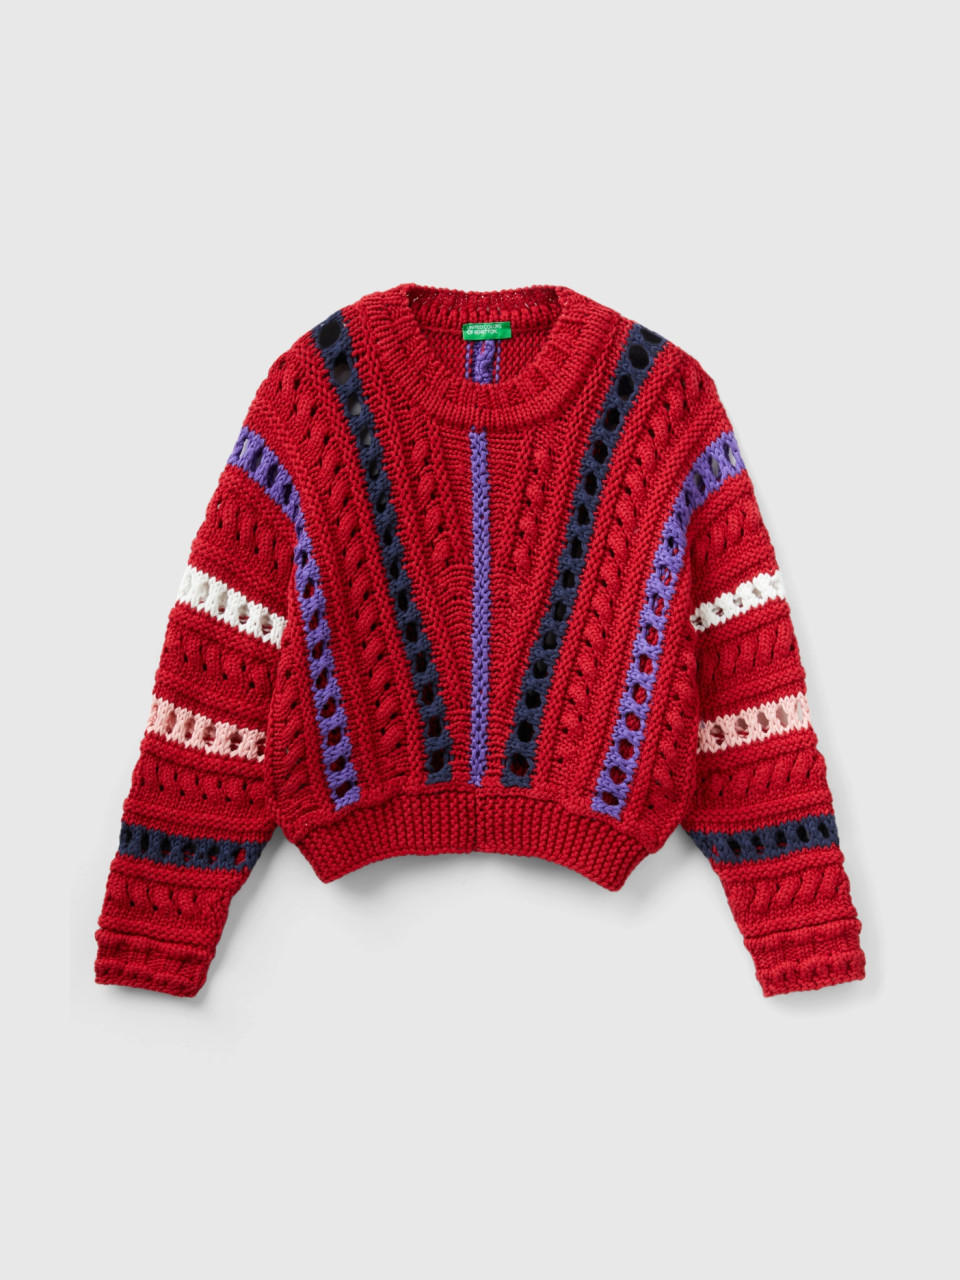 Benetton, Sweater With Cable Knit And Perforations, Red, Kids